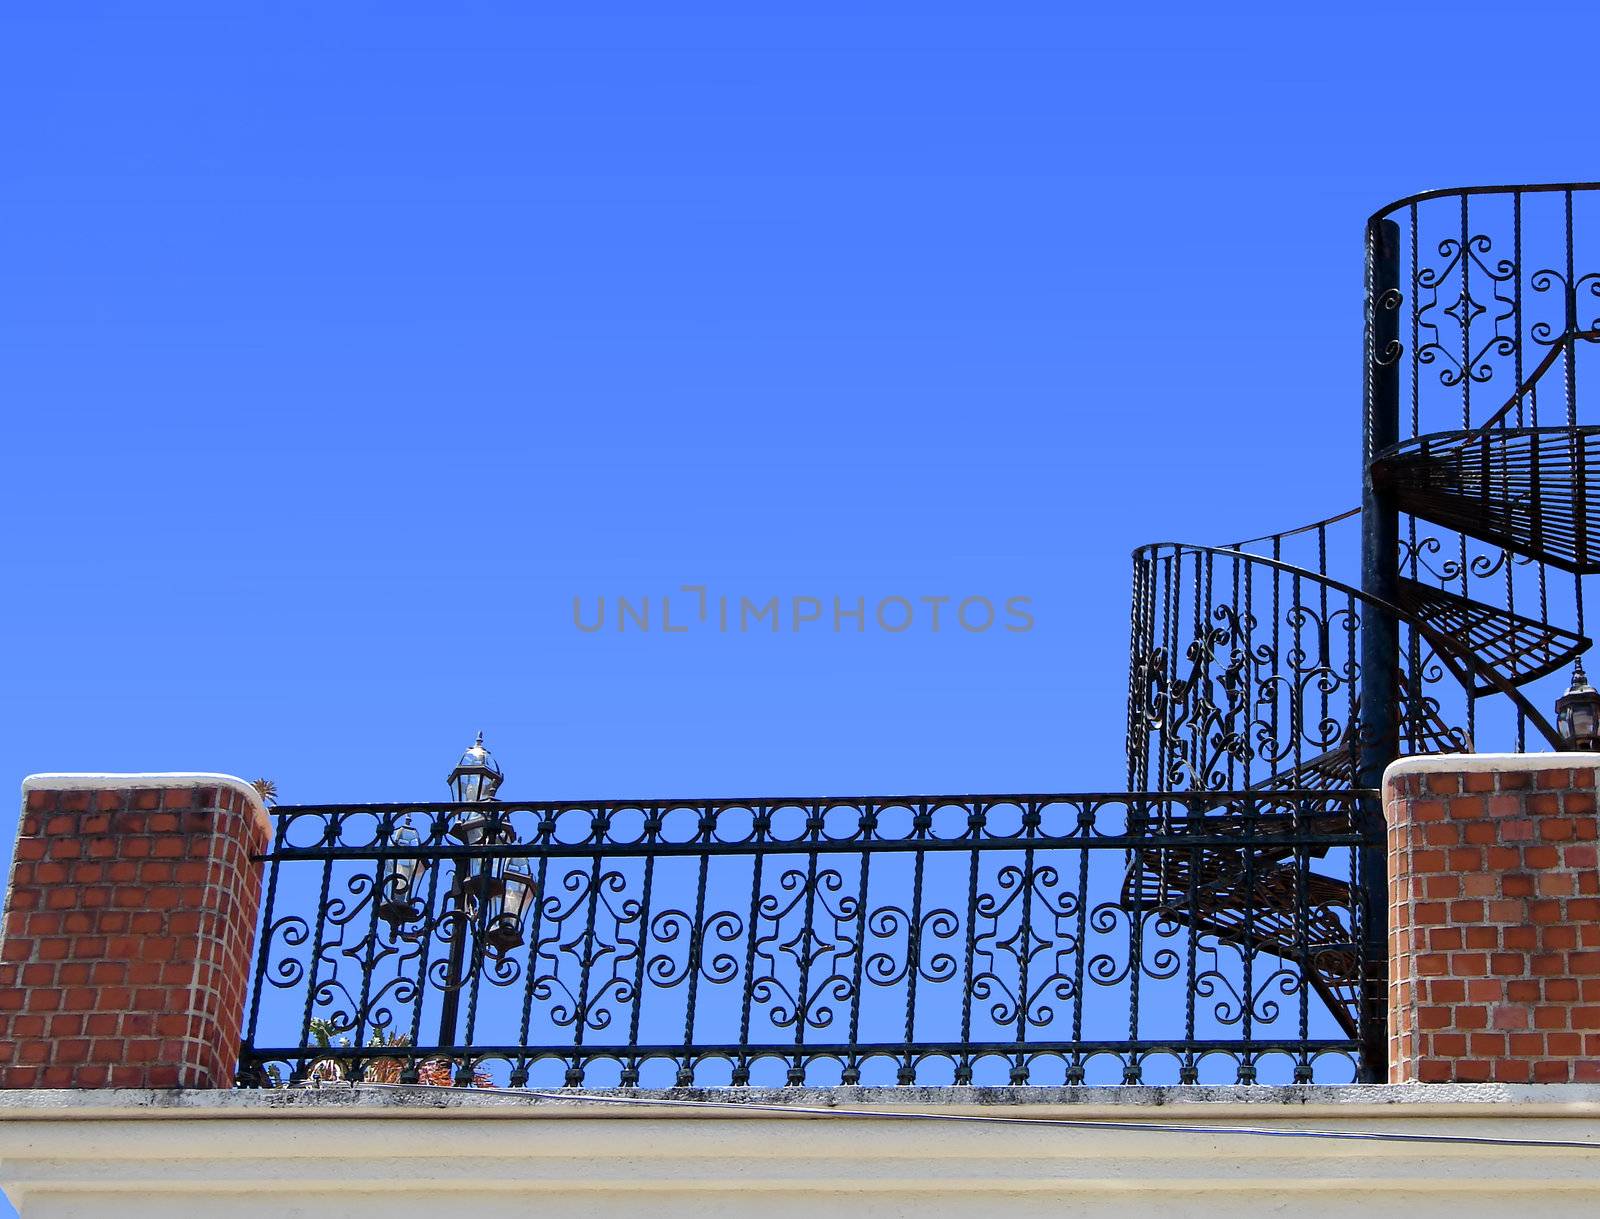 Wrought iron and baliuster outside of old brick building contrasted by bright blue sky